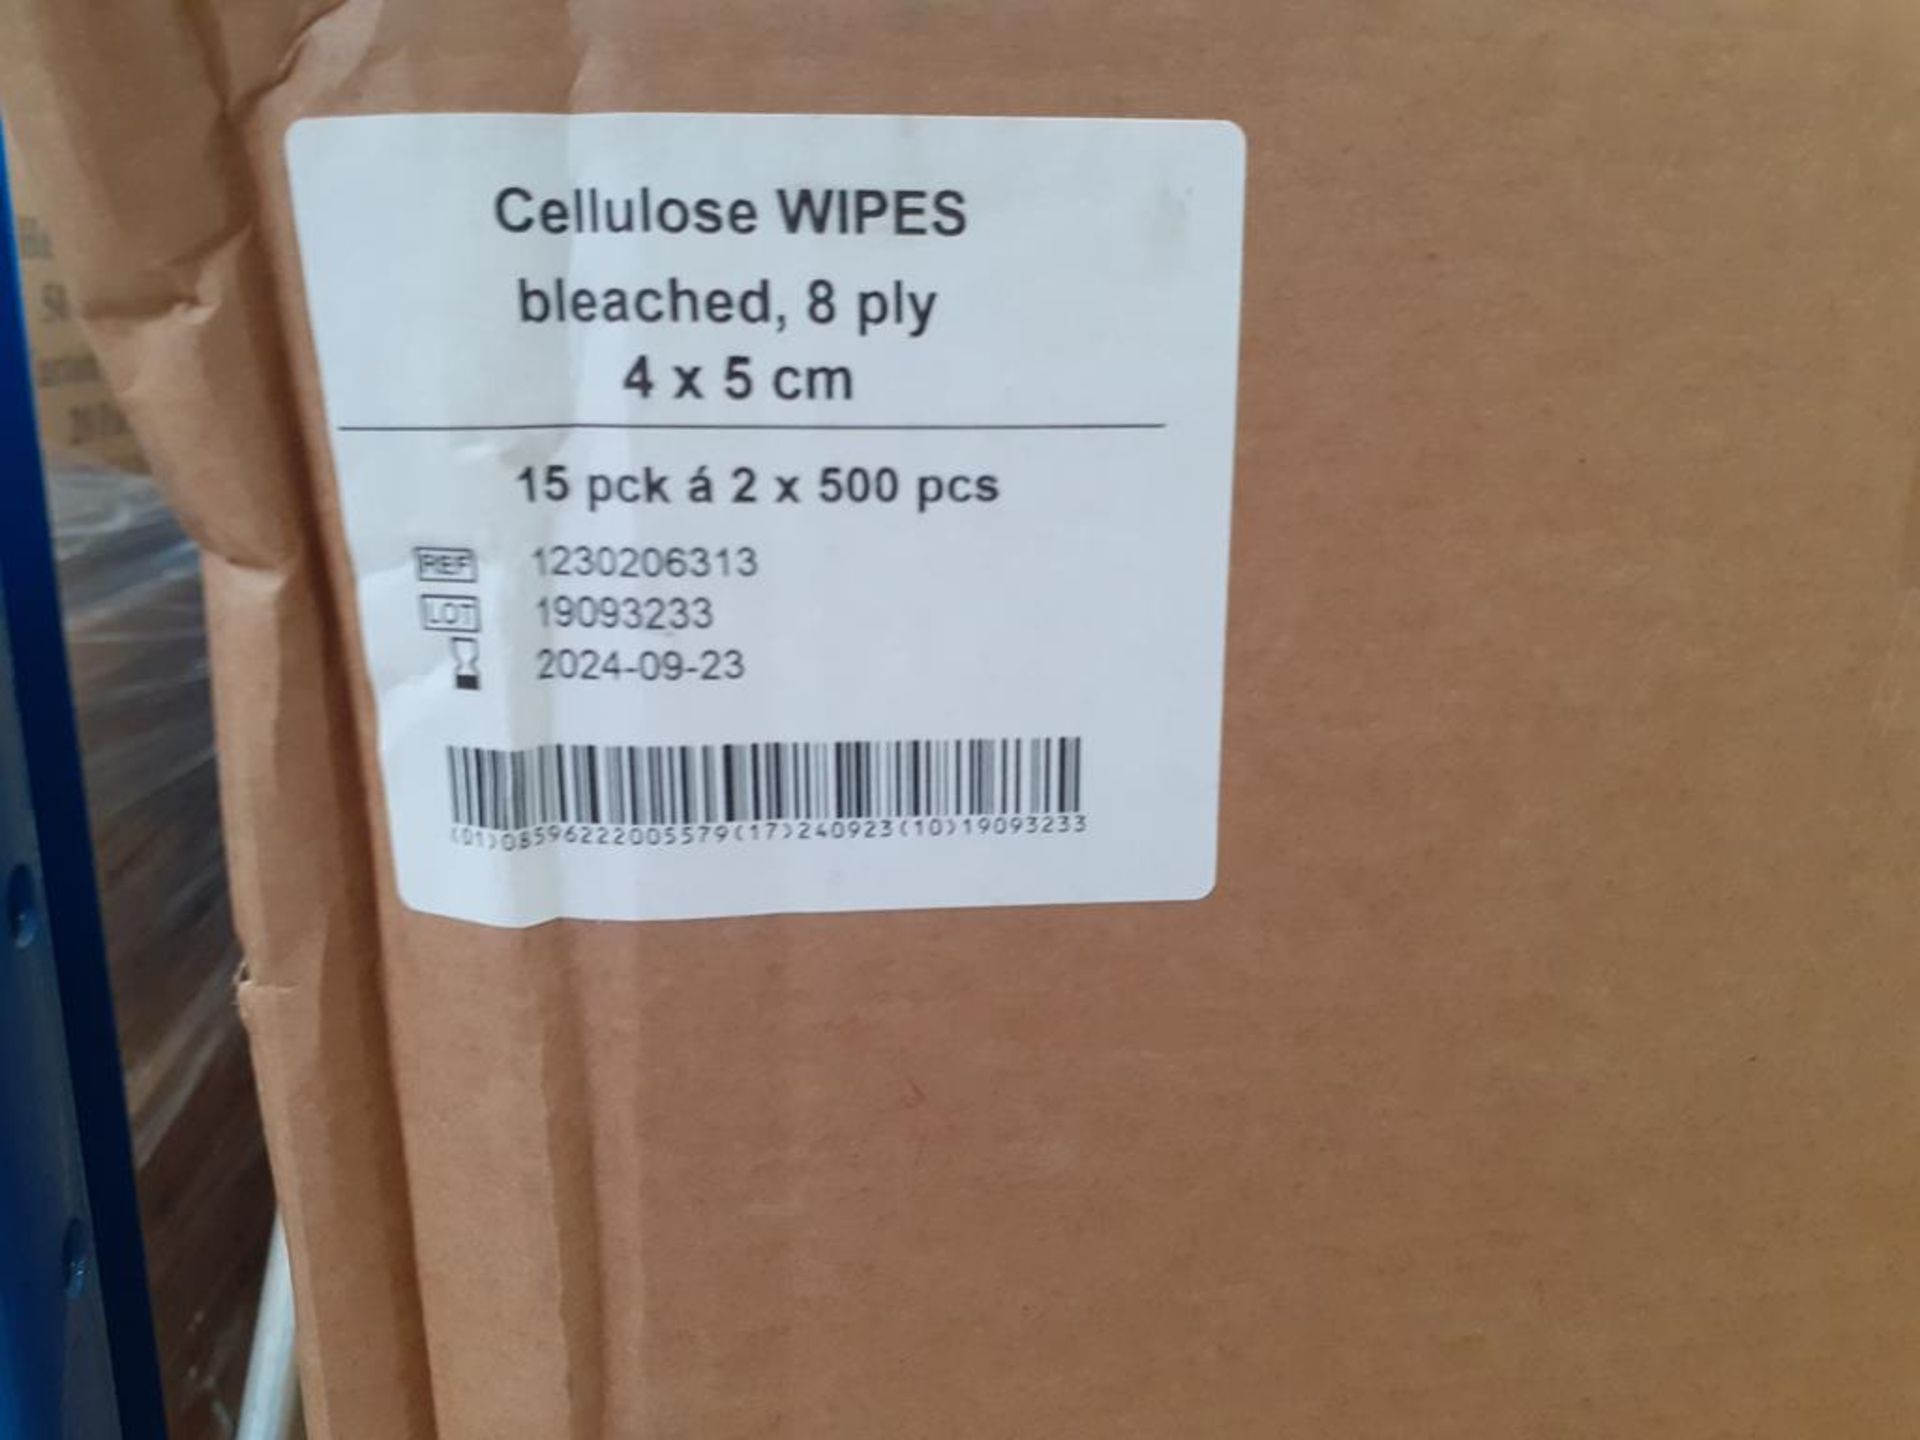 Approx 11 boxes of Bleached Cellulose Wipes, 4x5 cm - Image 2 of 3